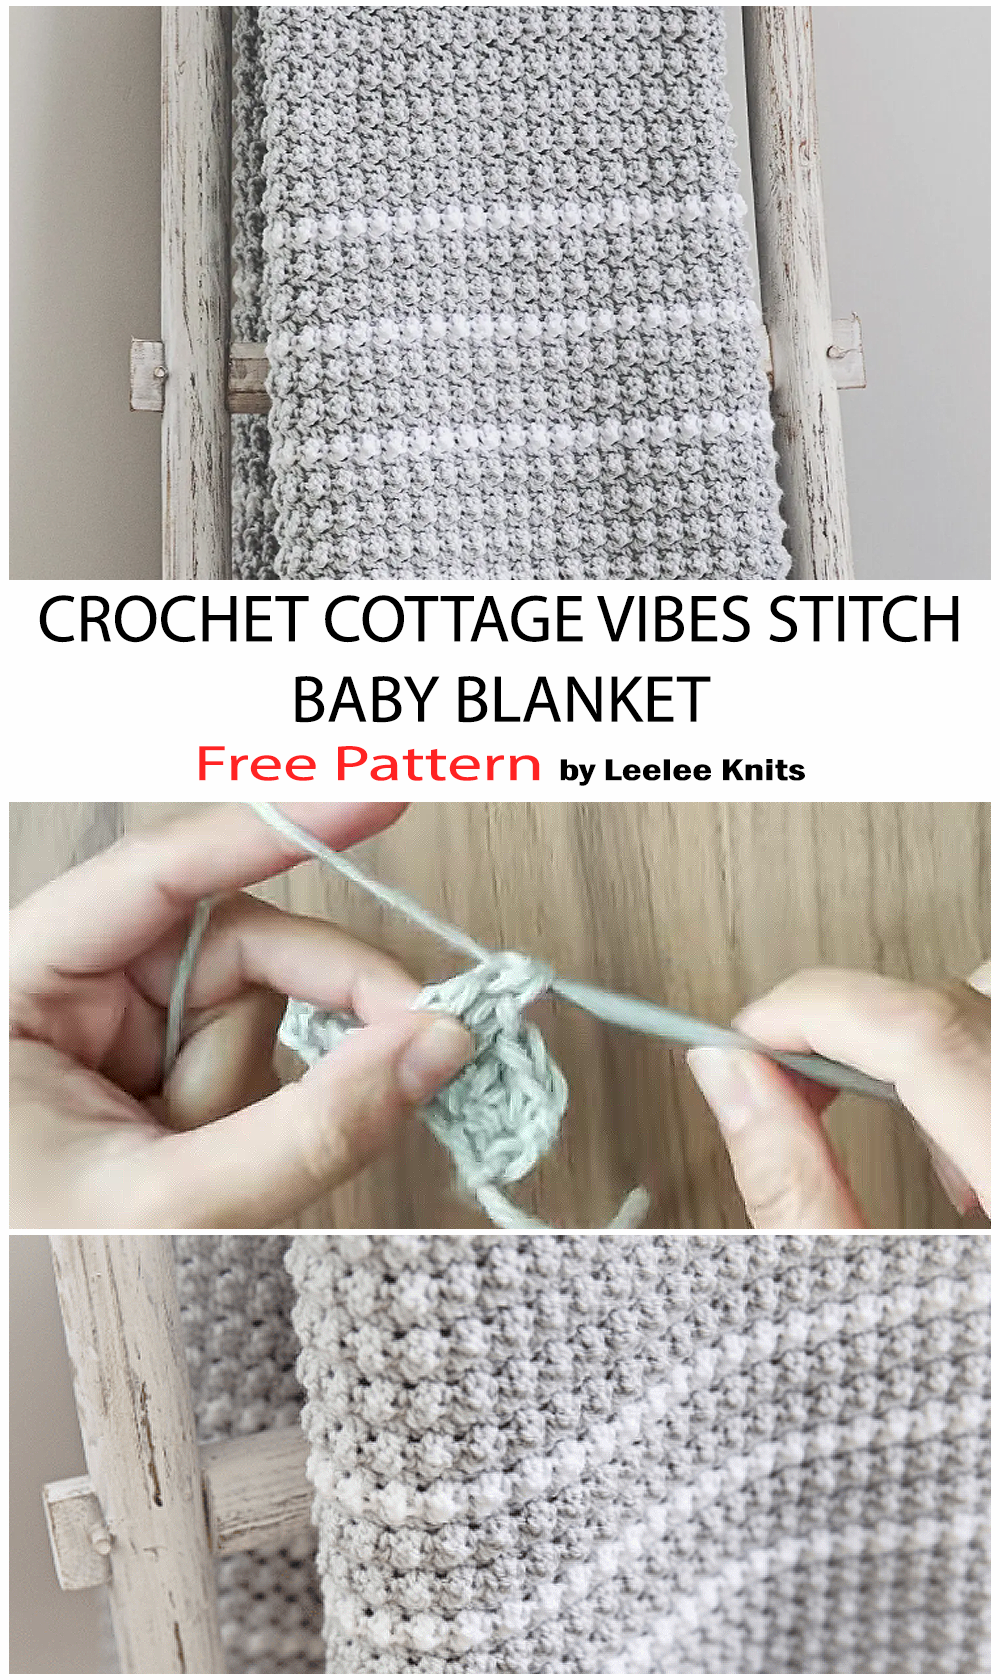 How To Crochet Cottage Vibes Stitch Baby Blanket - Free Pattern For Beginners